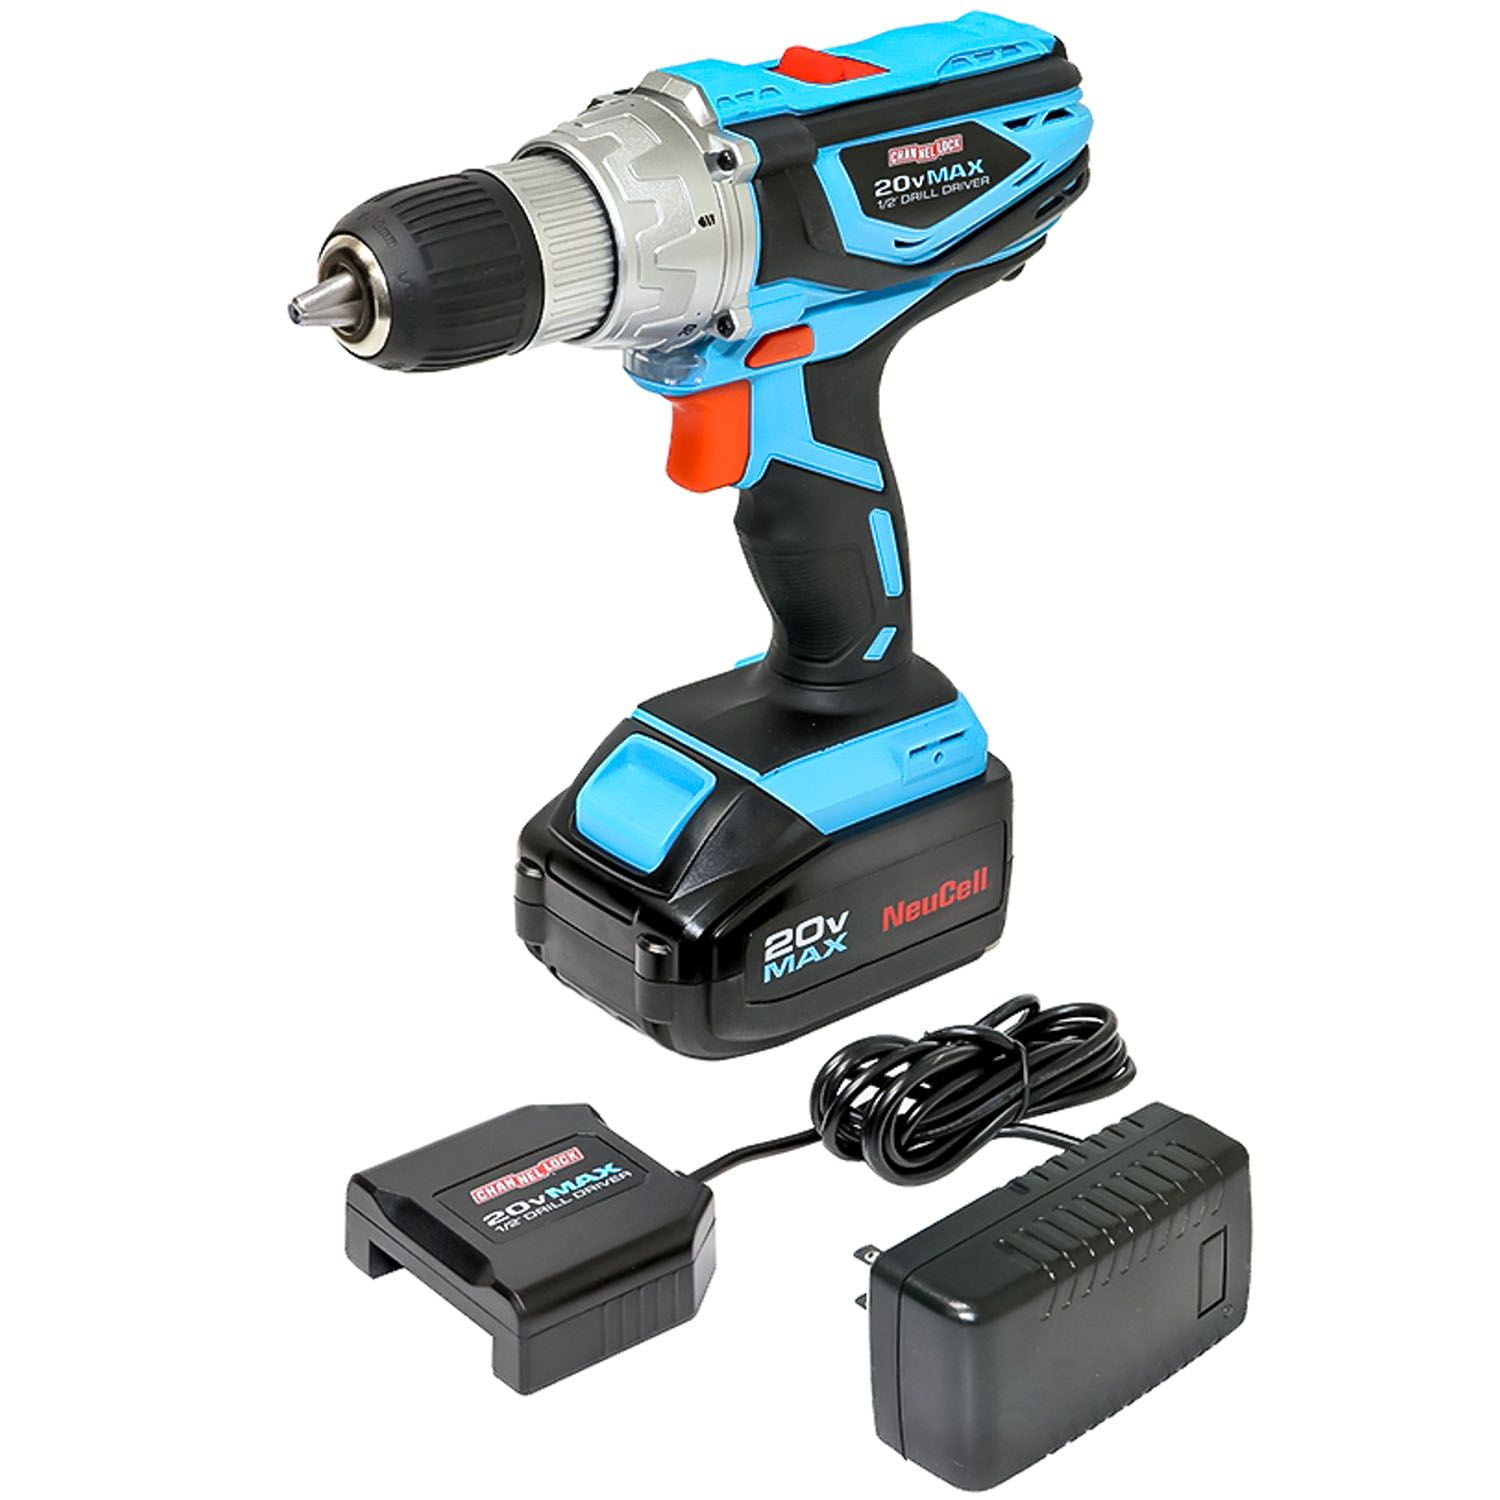 Channel Lock 20V Max 1/2" Cordless Drill Driver Battery Drill w/charger 